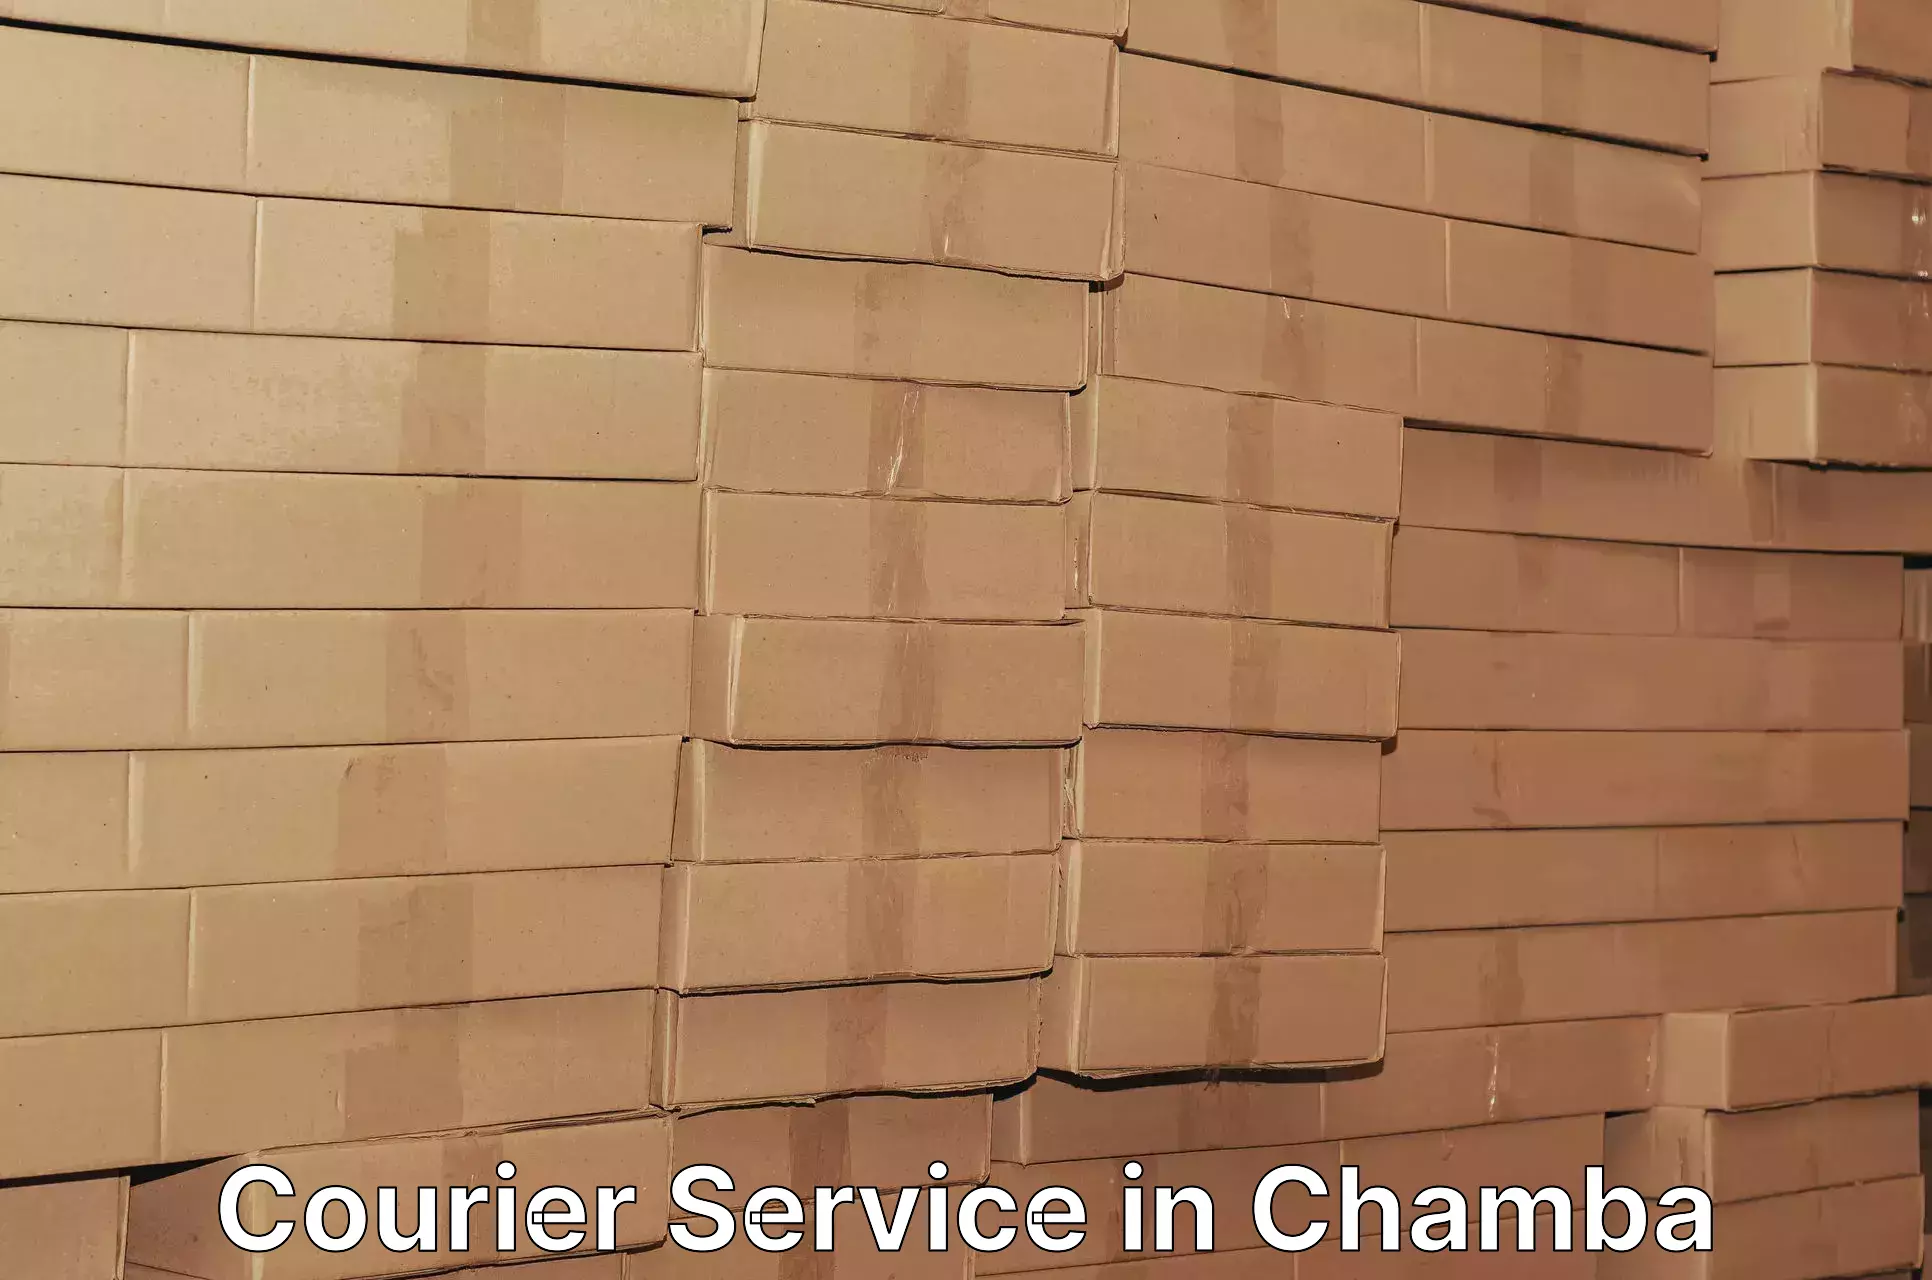 Global shipping solutions in Chamba